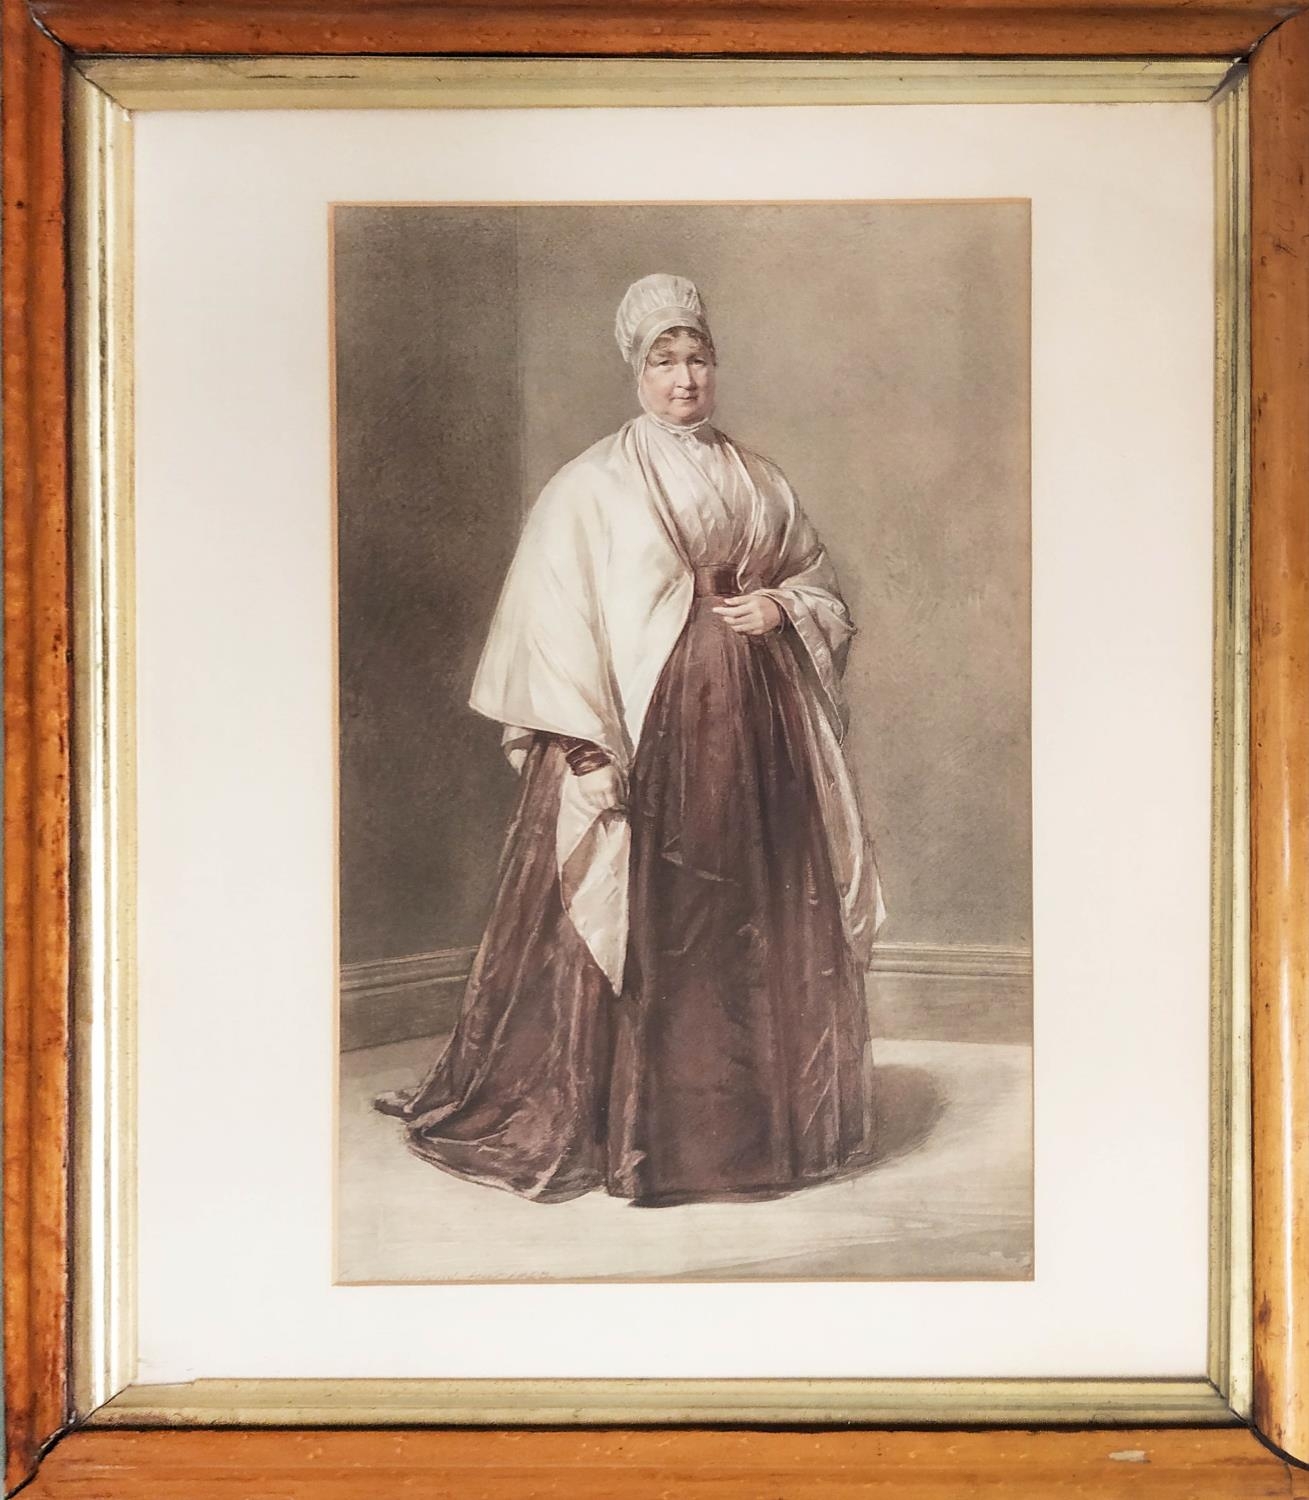 19TH CENTURY SCHOOL, 'Elizabeth Fry', watercolour, signed and dated 1843, framed.